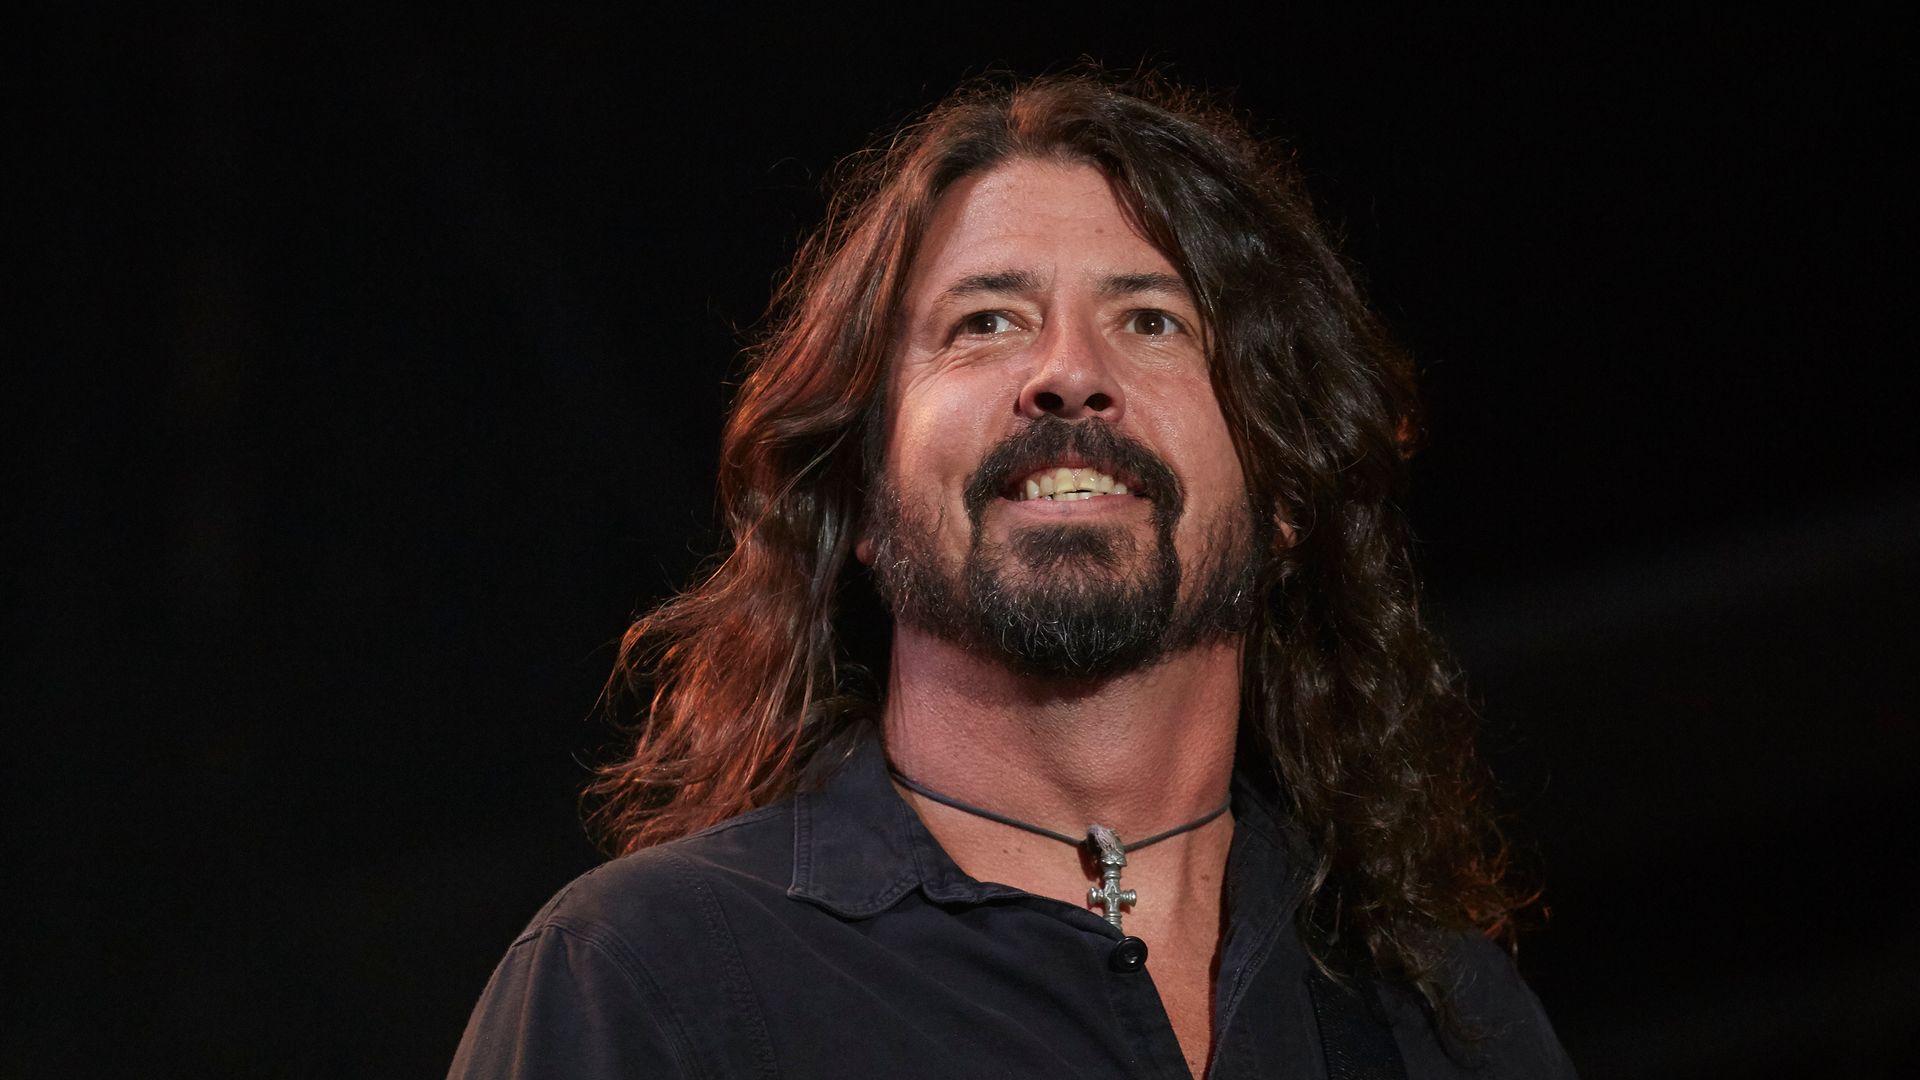 Dave Grohl makes emotional return to the stage with surprising new Foo Fighters drummer